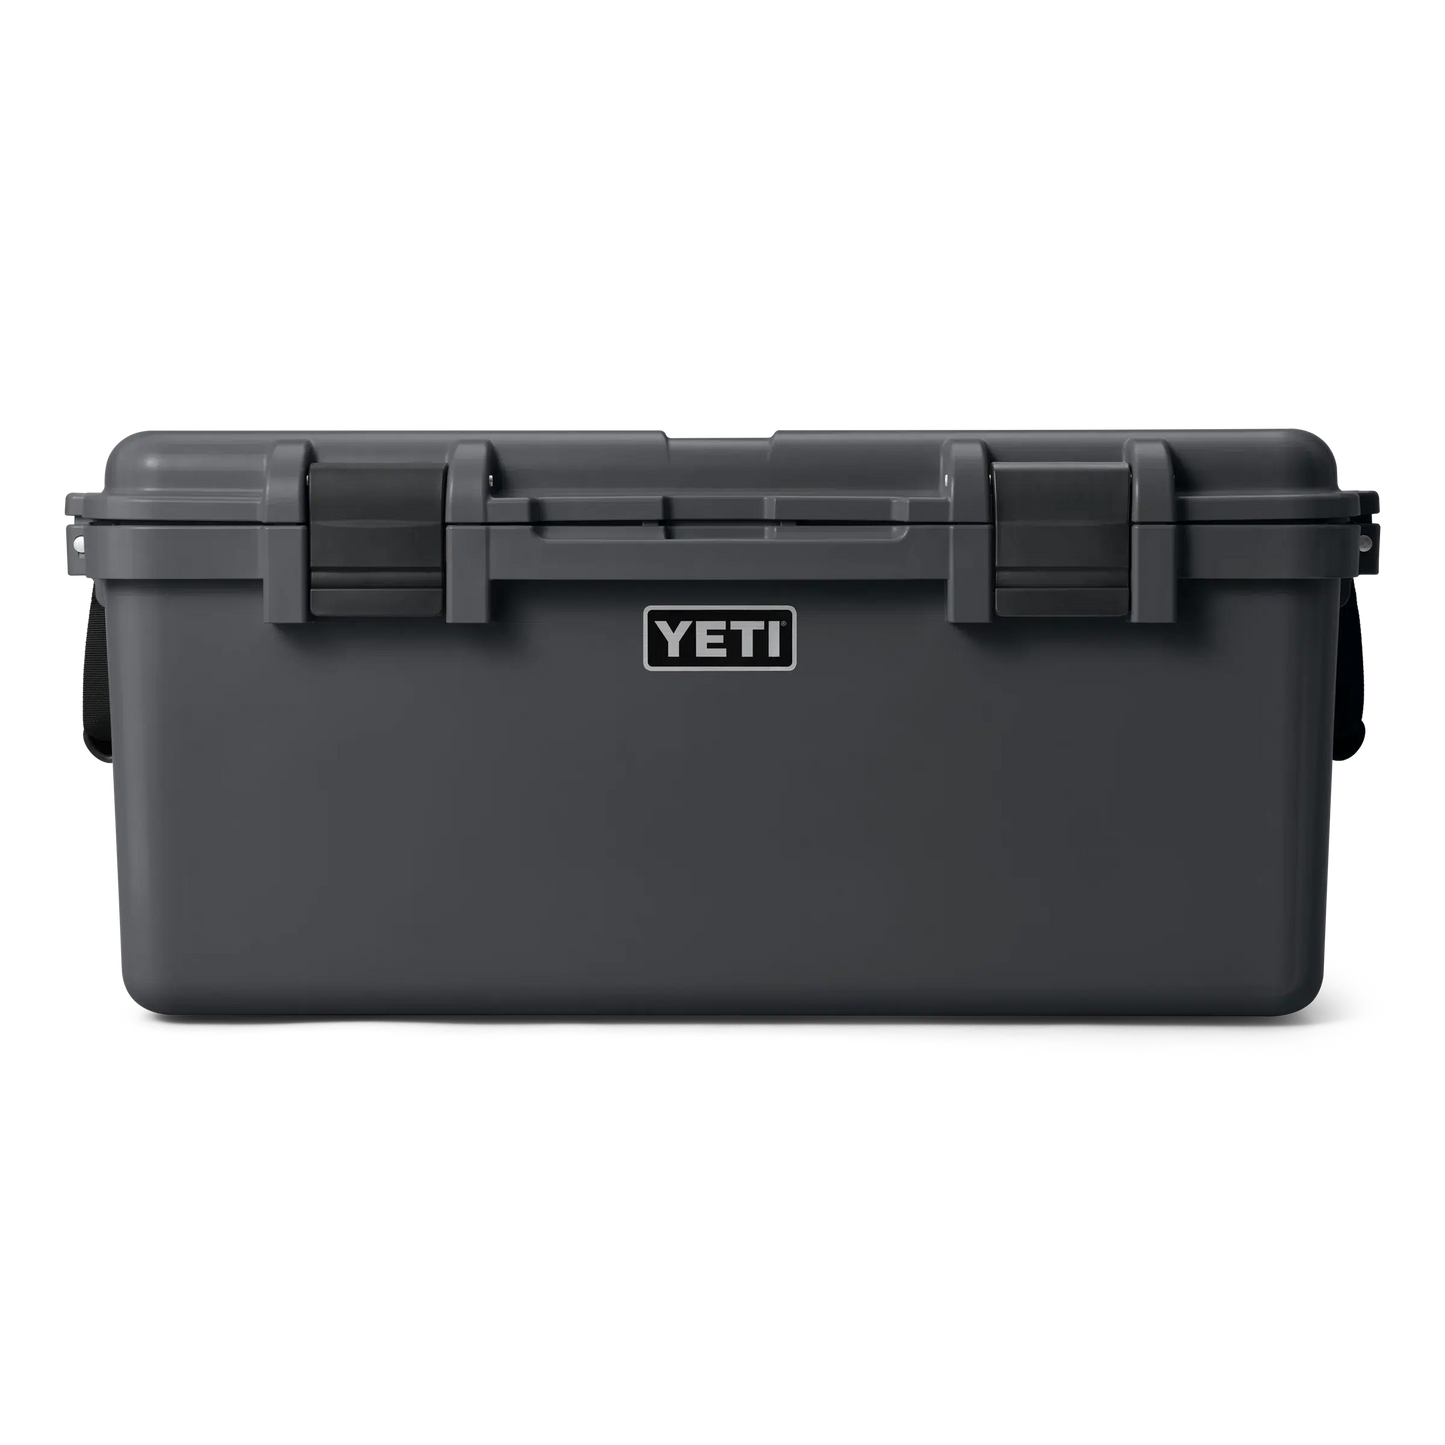 Yeti Loadout Gobox 60 Gear Case-Tackle Boxes & Bags-Yeti-Charcoal-Fishing Station